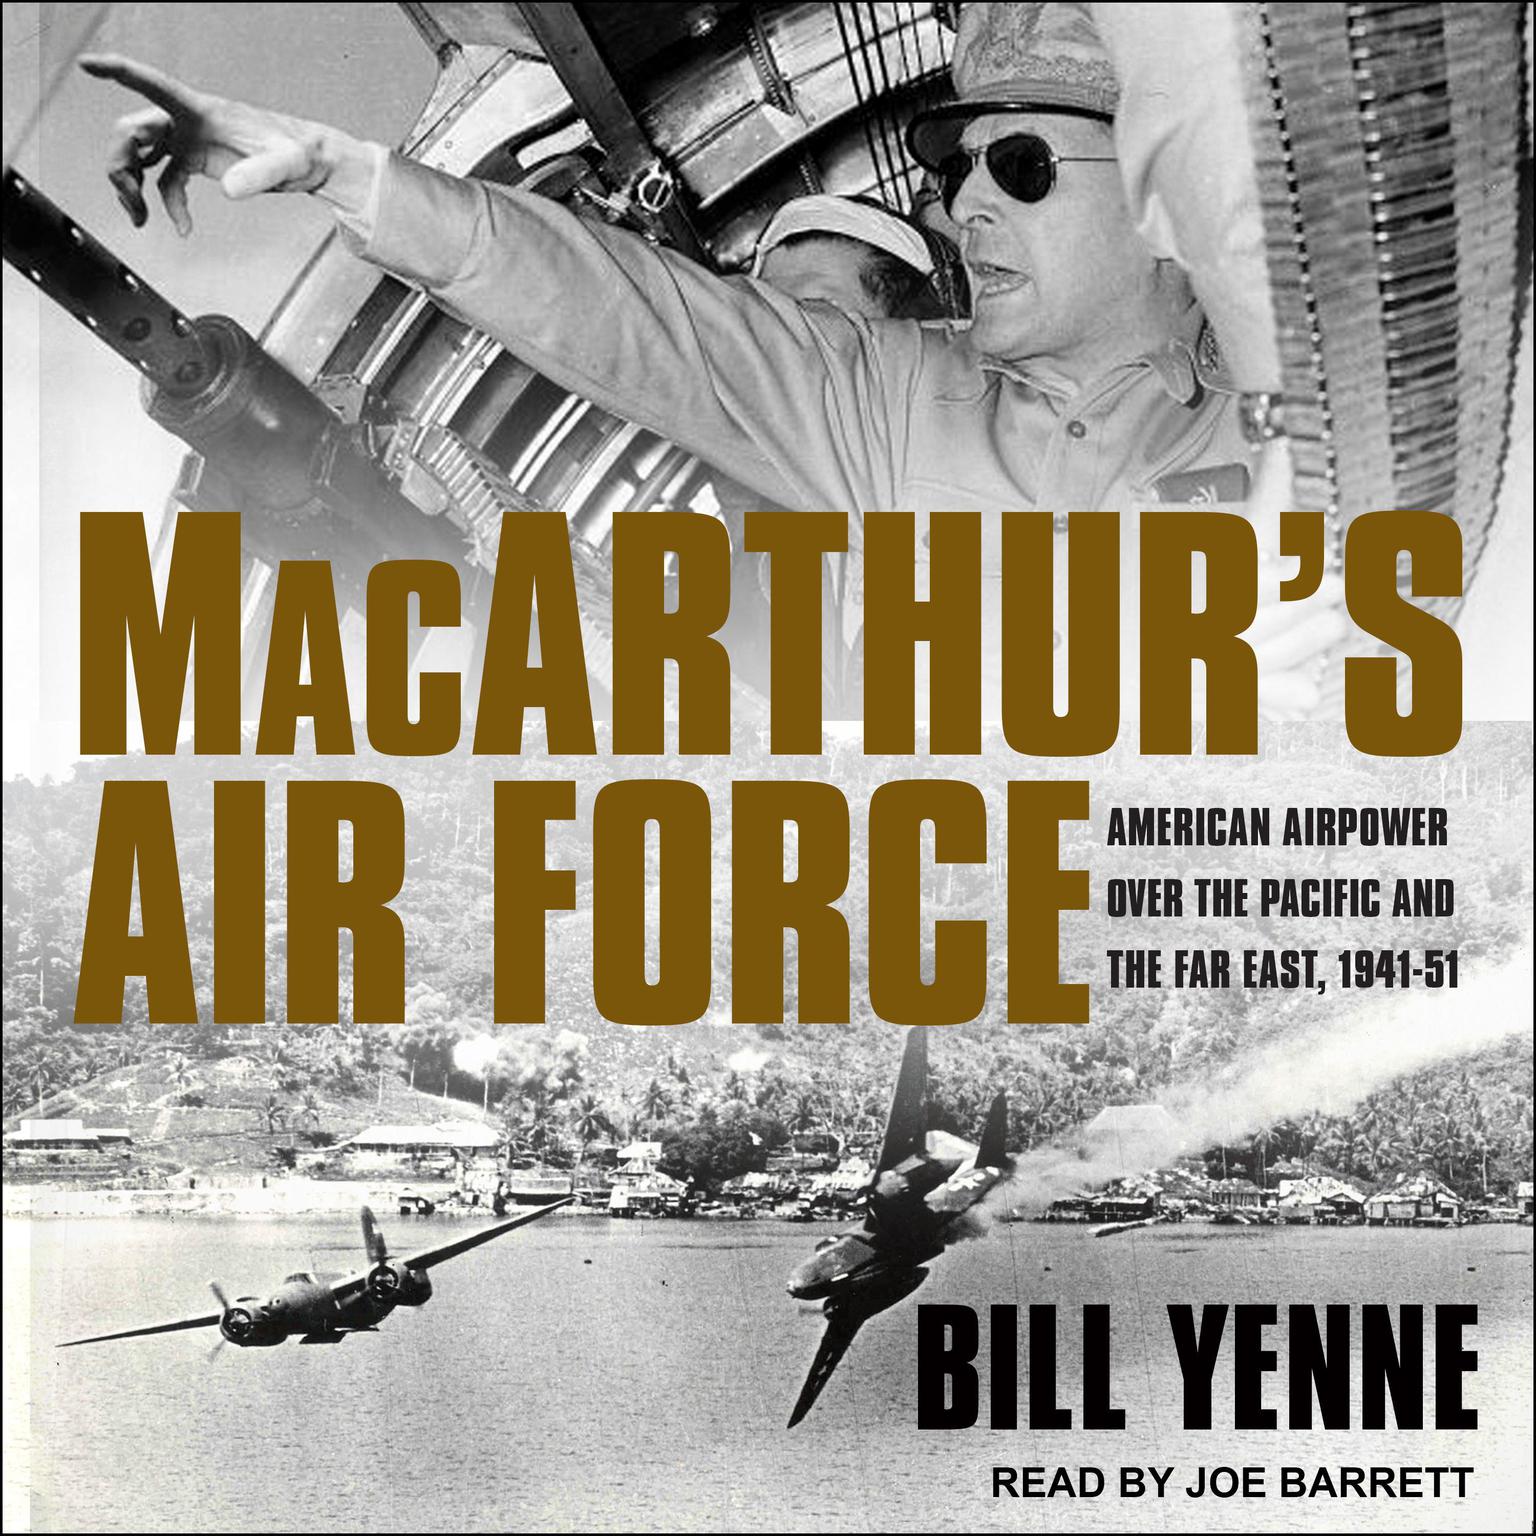 MacArthur’s Air Force: American Airpower Over the Pacific and the Far East, 1941-51 Audiobook, by Bill Yenne